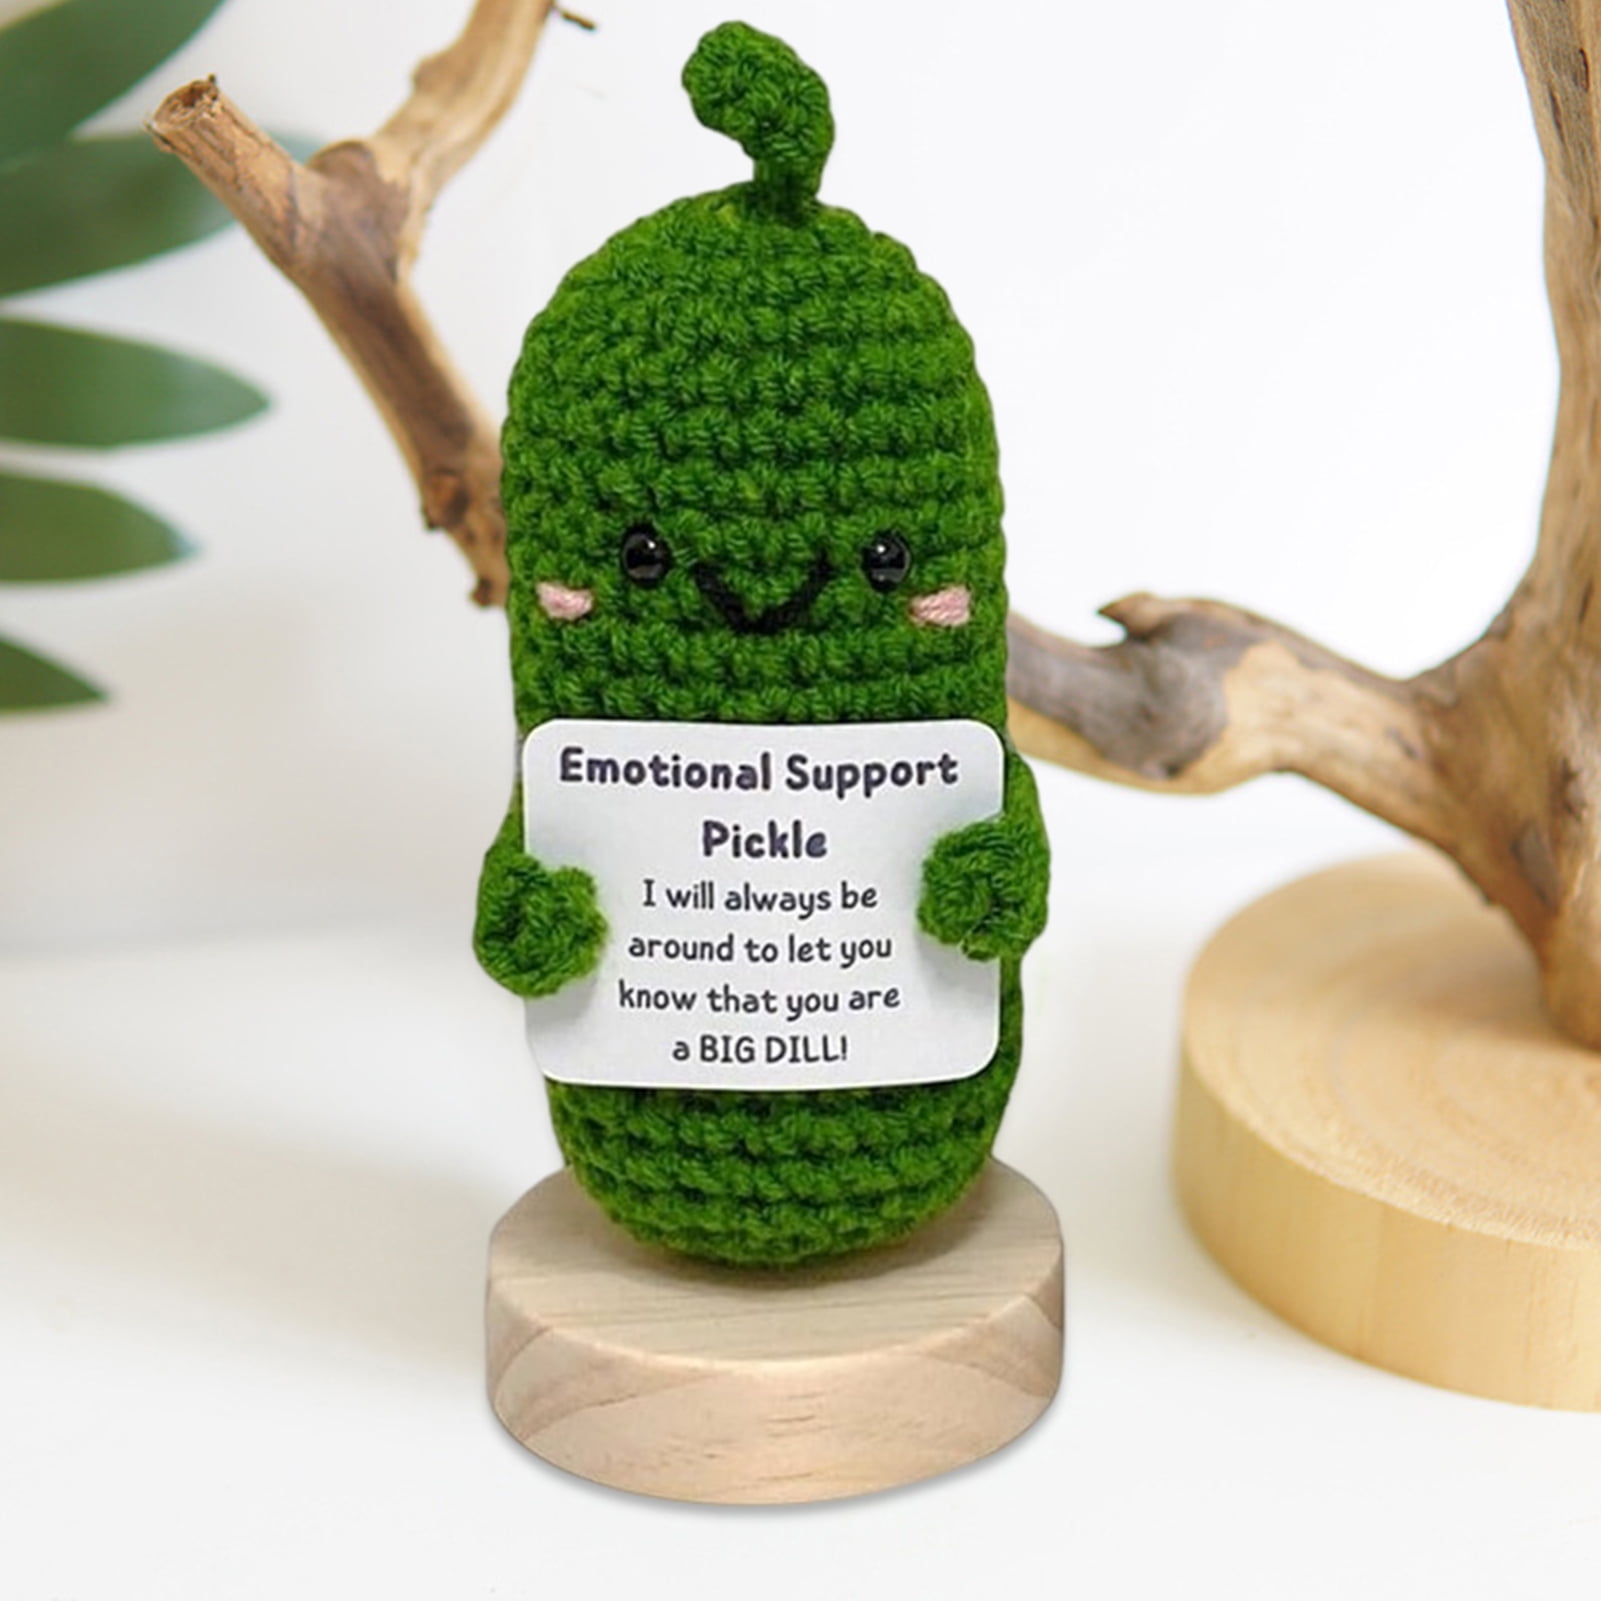 RUGCABBIE 3PCS Cucumber Knitting Doll,Funny Reduce Pressure Toy, Crochet  Pickle Ornament for Office Desk,Handmade Emotional Support Pickled Cucumber